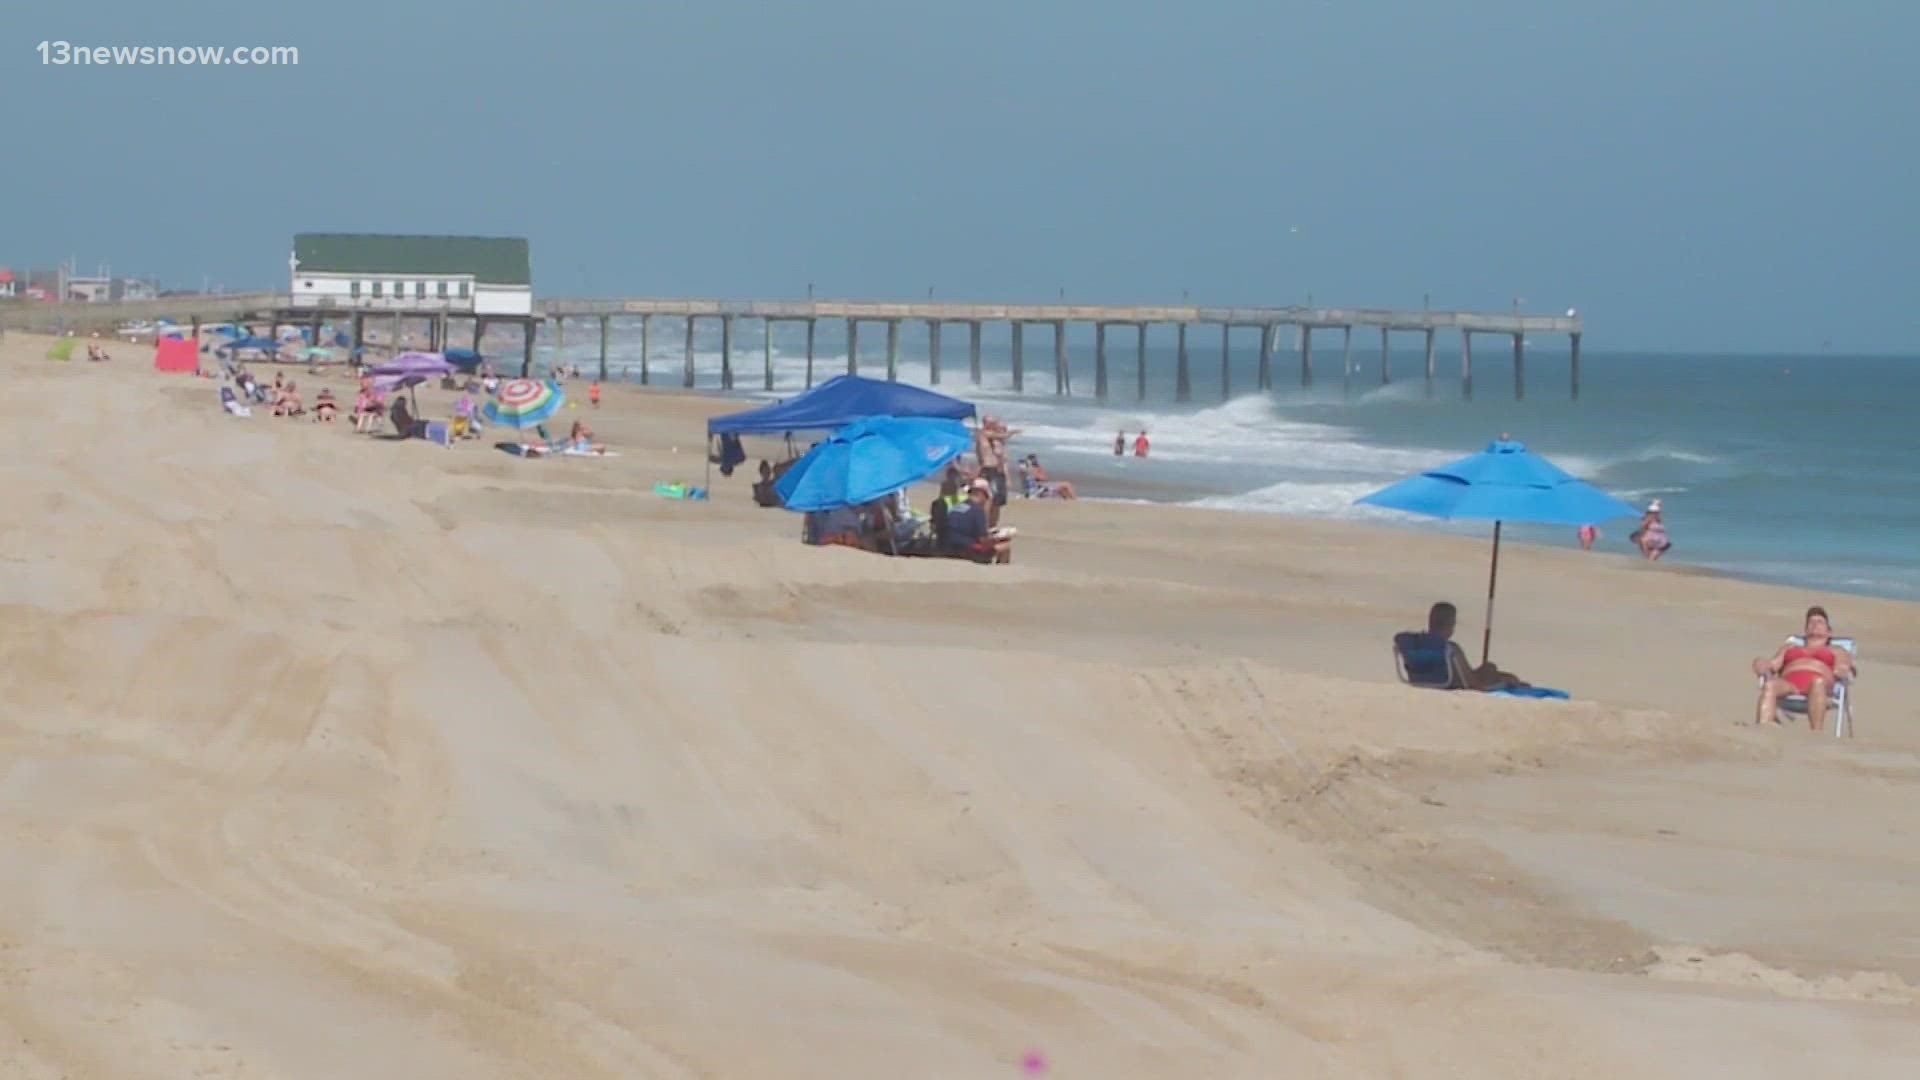 Cape Hatteras National Seashore officials want people to avoid the beach in Rodanthe due to problems with ocean overwash and beach erosion.